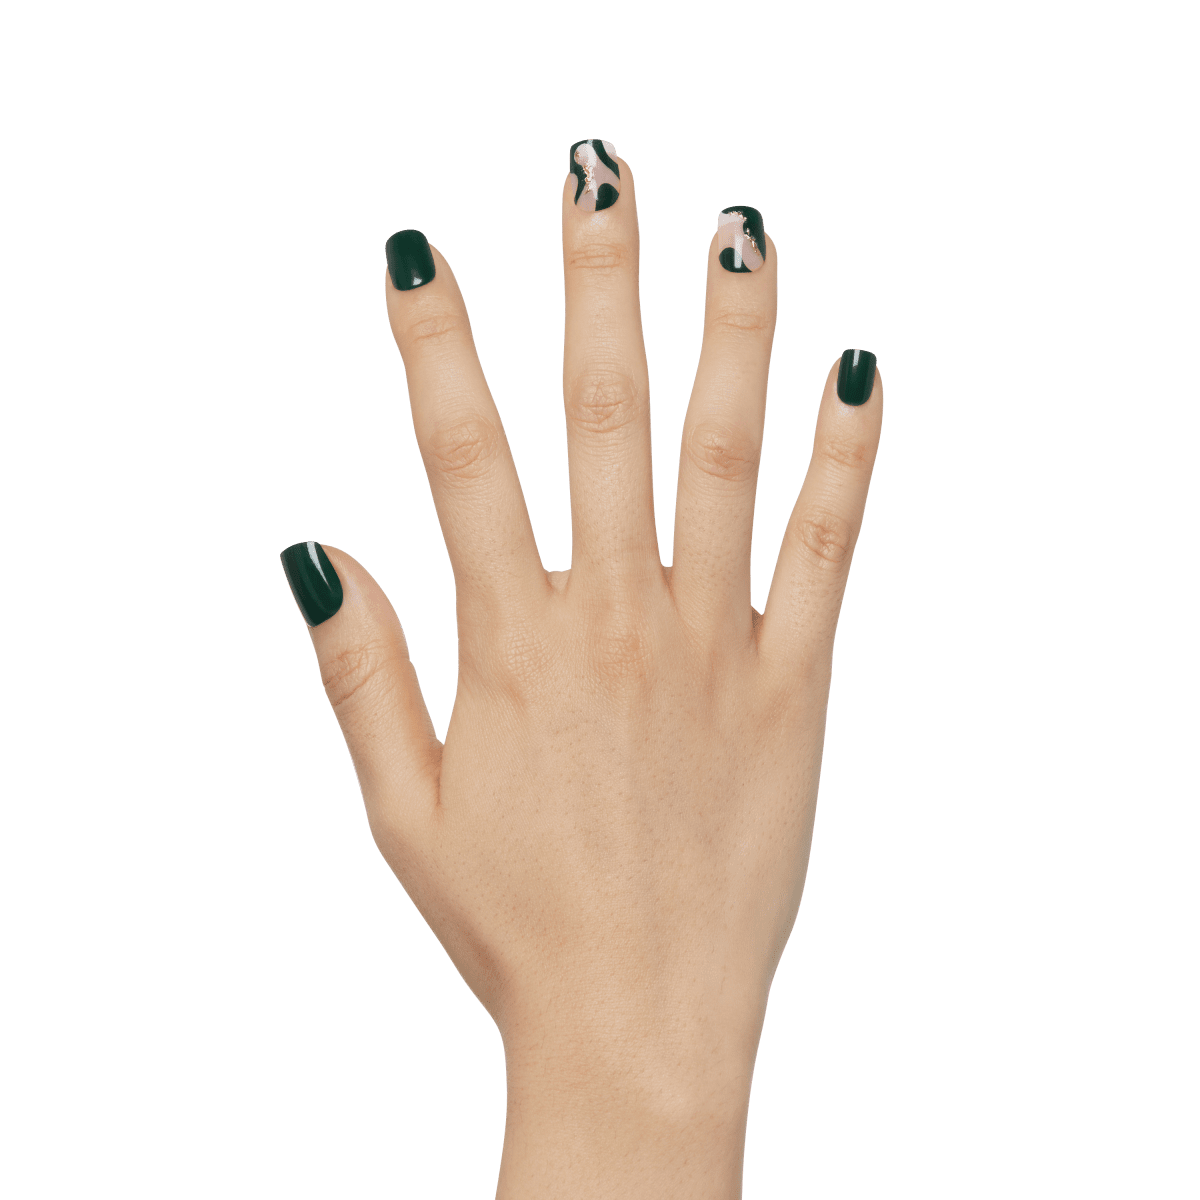 Best Summer Nail Designs - 35 Colorful Nail Ideas You Can Do It Yourself At  Home New 2019 - Page 5 of 35 - clear crochet | Nagelideen, Nägel ideen,  Sommer nägel ideen